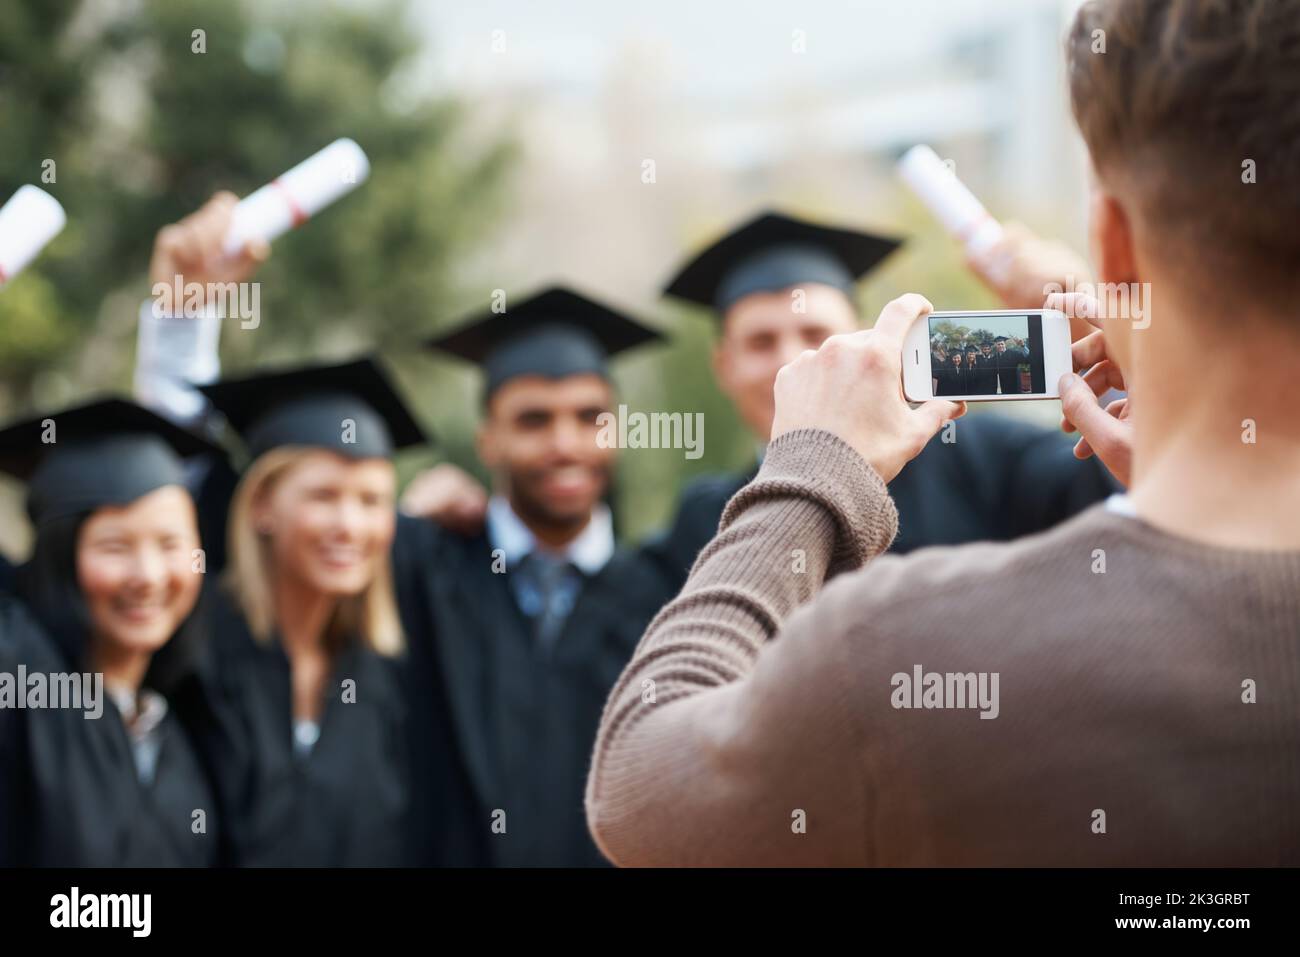 Female college graduate in cap and gown - Stock Image - F018/4992 - Science  Photo Library